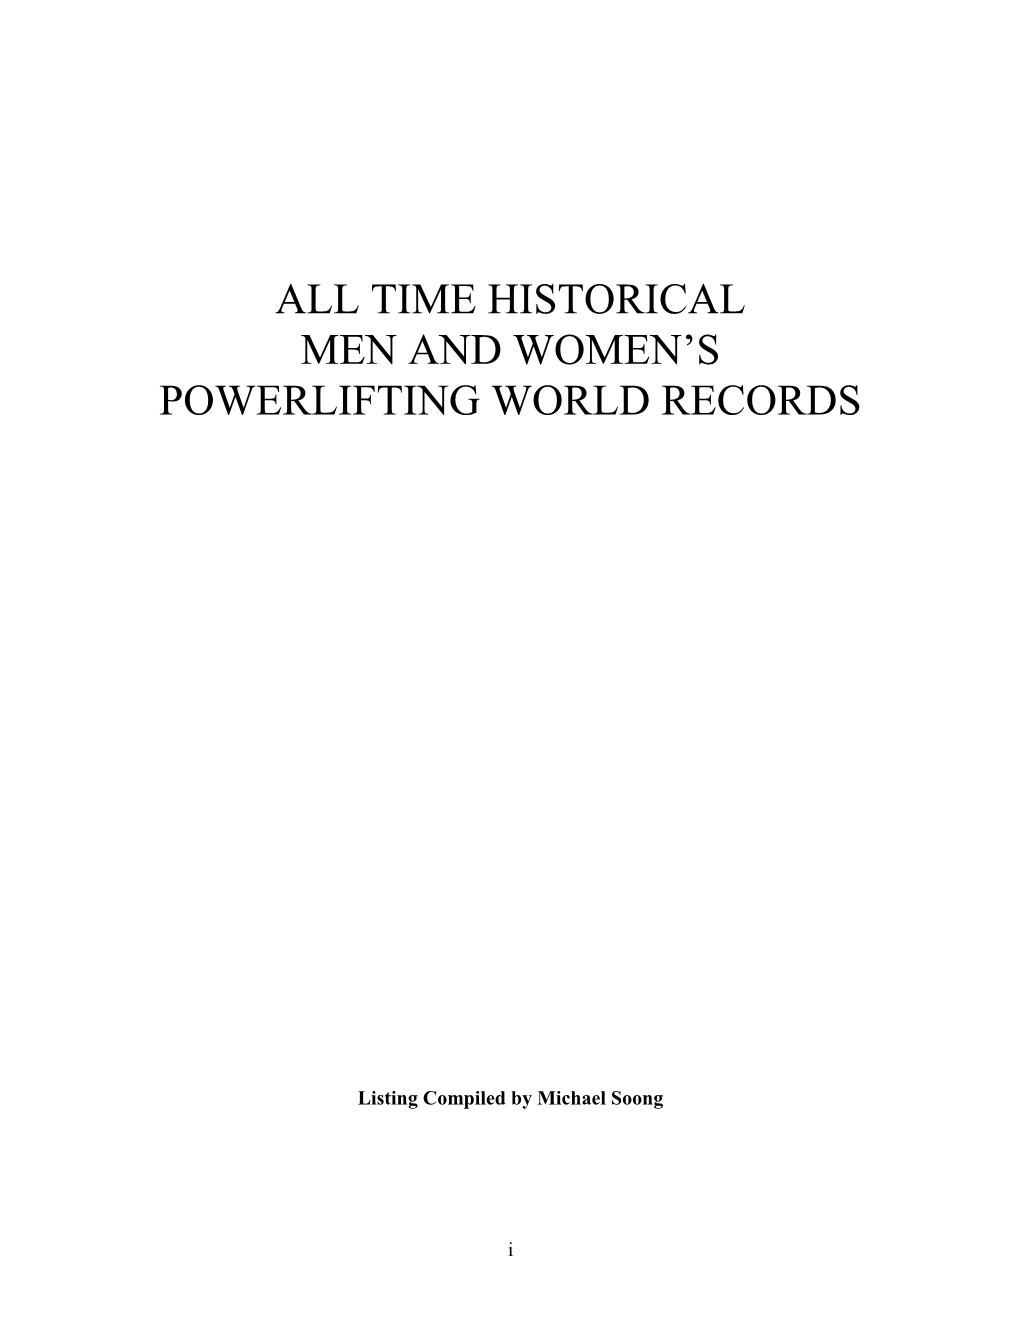 Time Historical Men and Women's Powerlifting